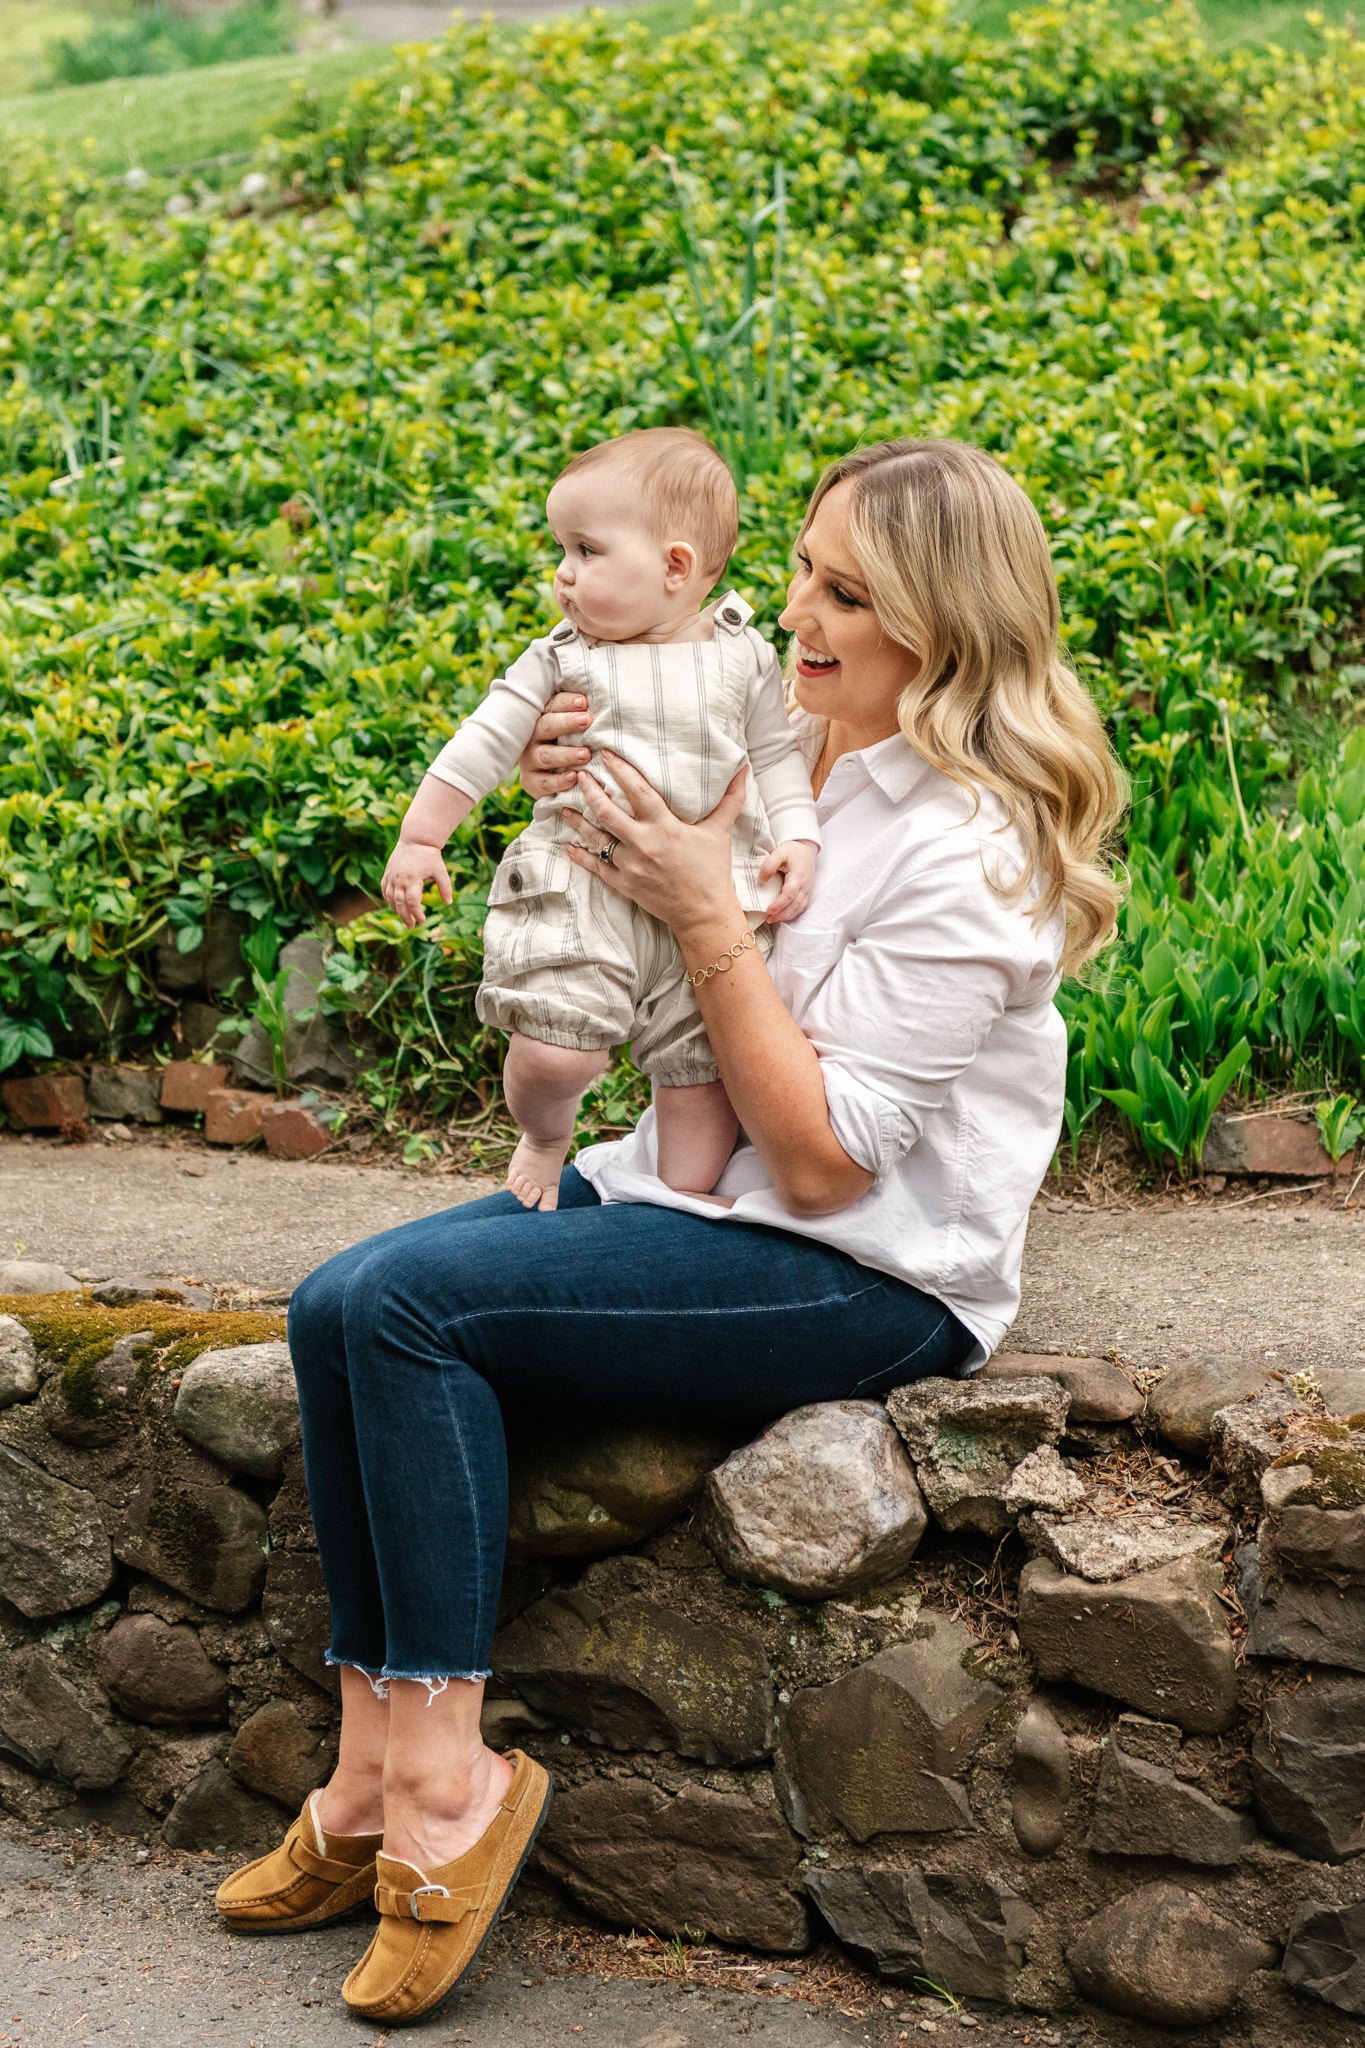  A mother laughs at her baby in South Orange, NJ by Nicole Hawkins Photography. family portraits professional at home portraits east coast #NicoleHawkinsPhotography #NicoleHawkinsfamilies #AtHomePortraits #EastCoastFamilyPhotographer #NewJerseyInHome